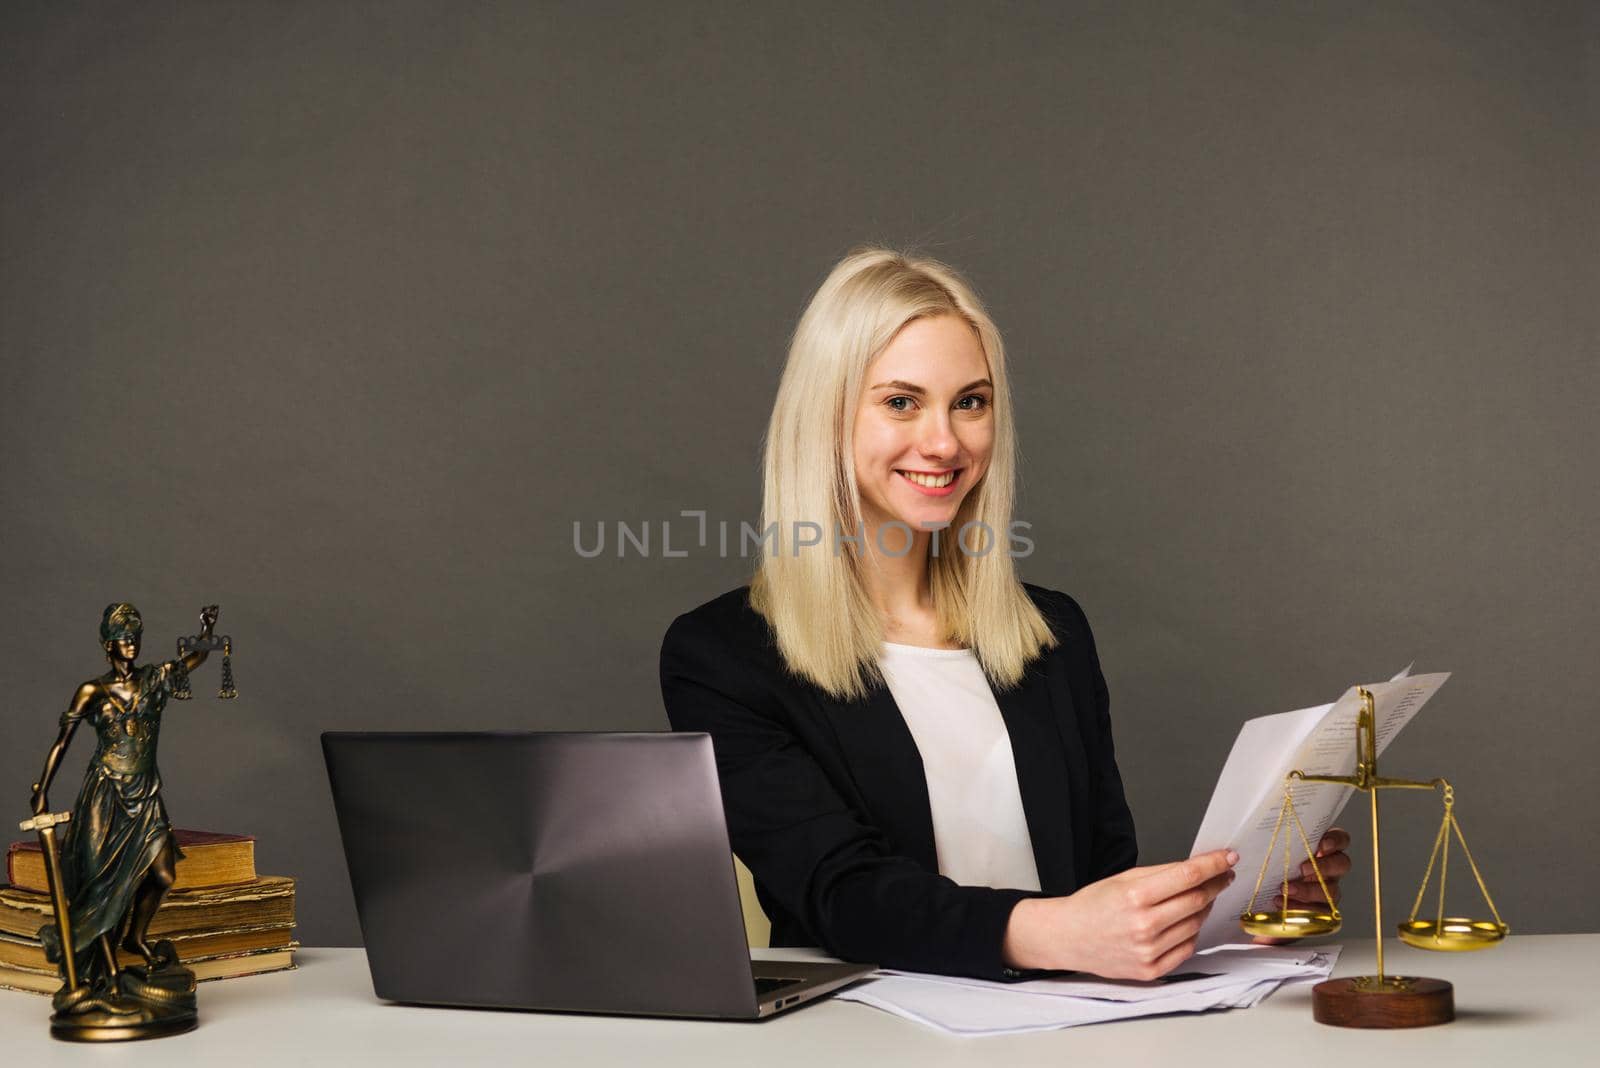 Portrait of smiling businesswoman looking at camera and smiling while working at office - image